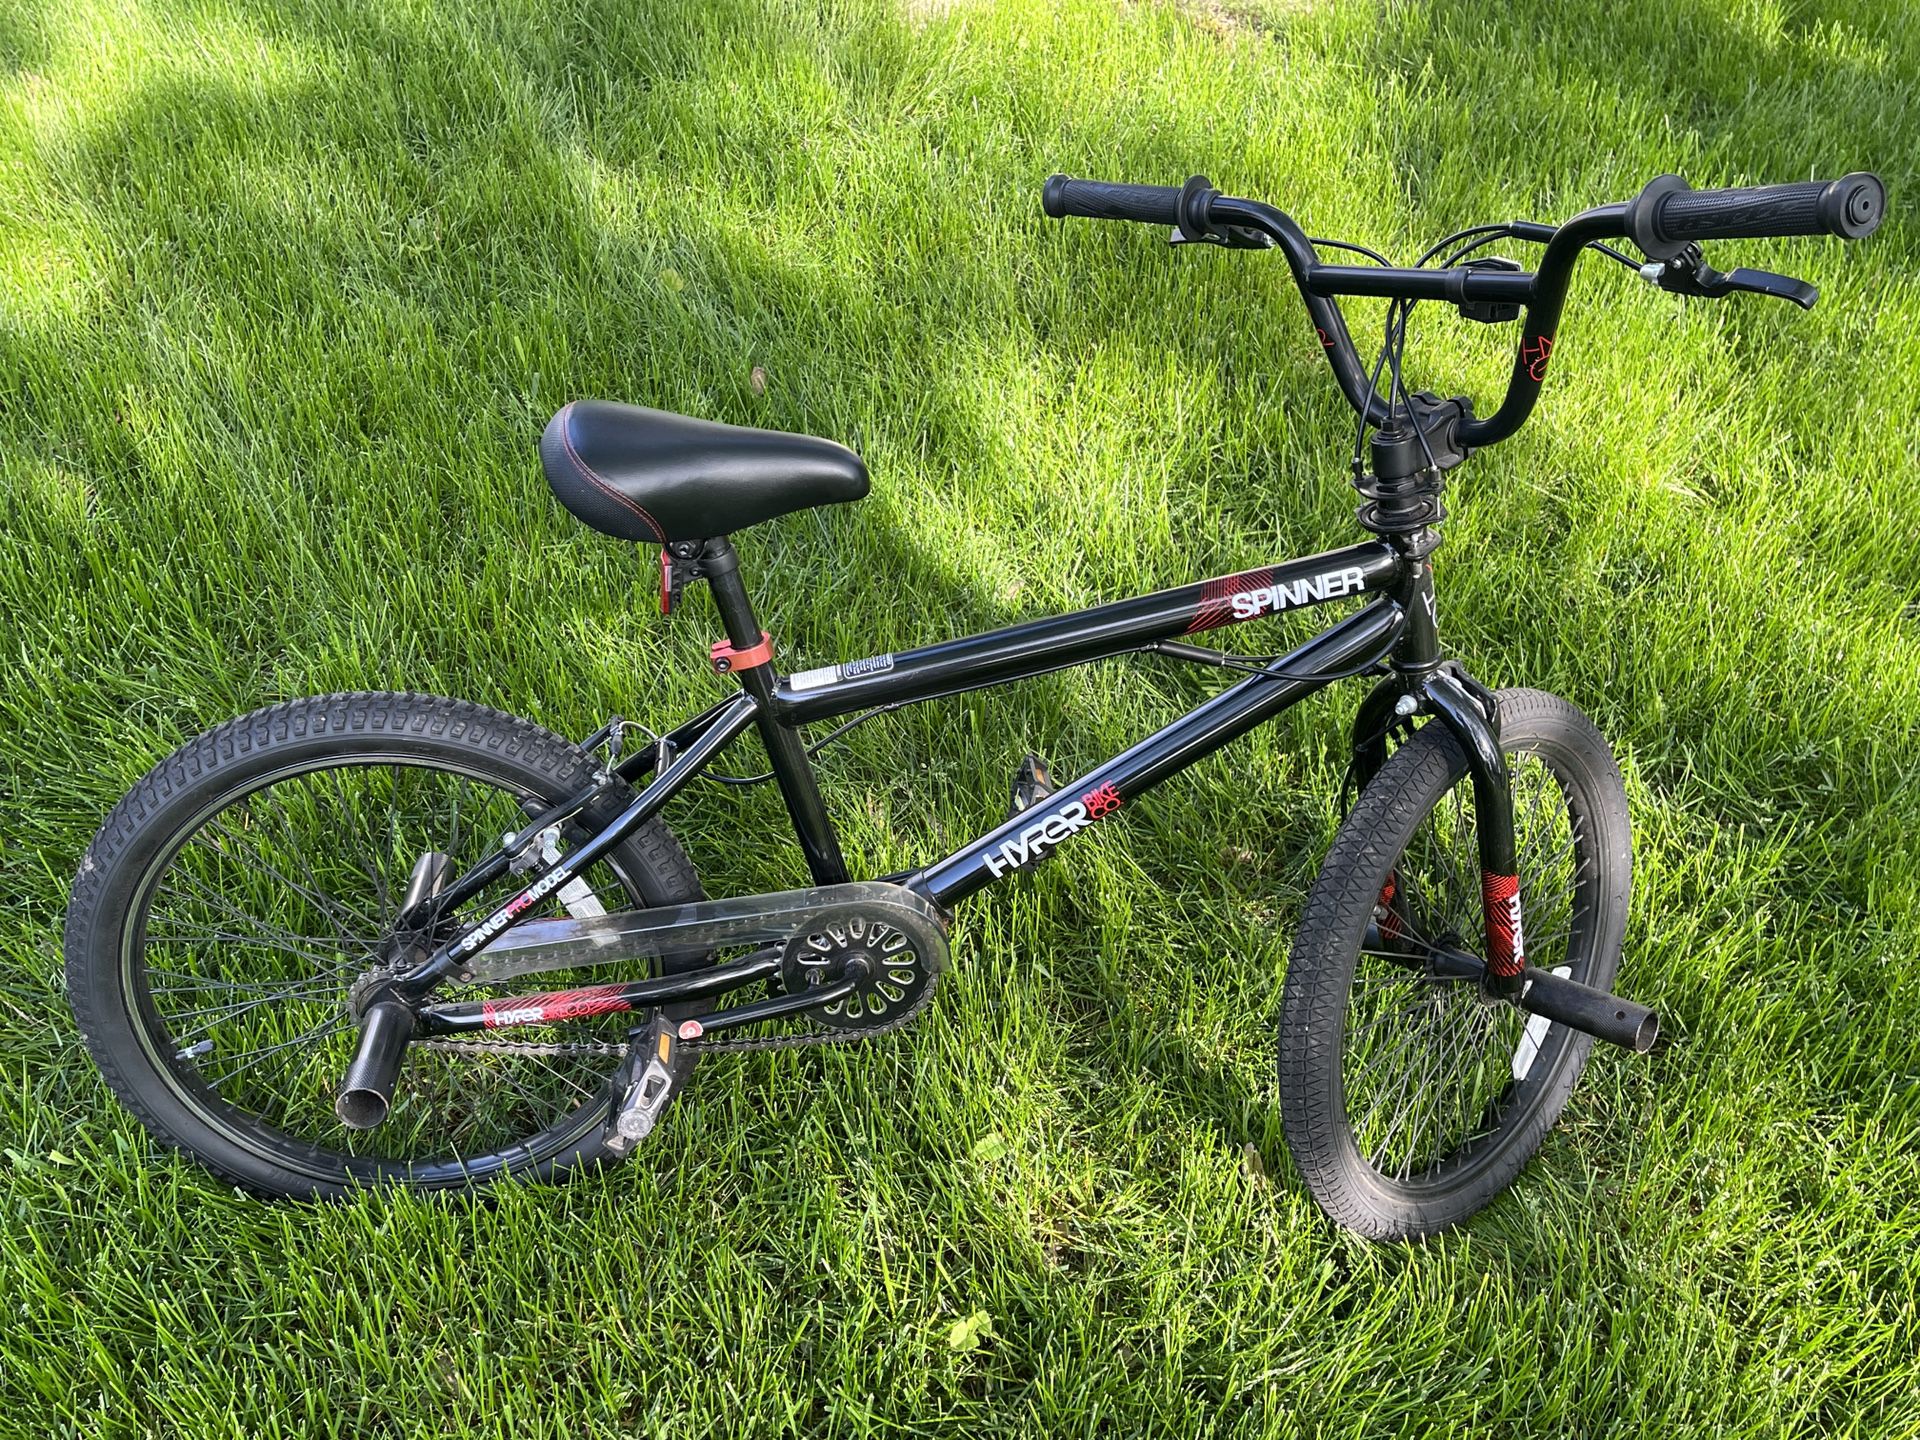 Bicycle for Kids - Size 20